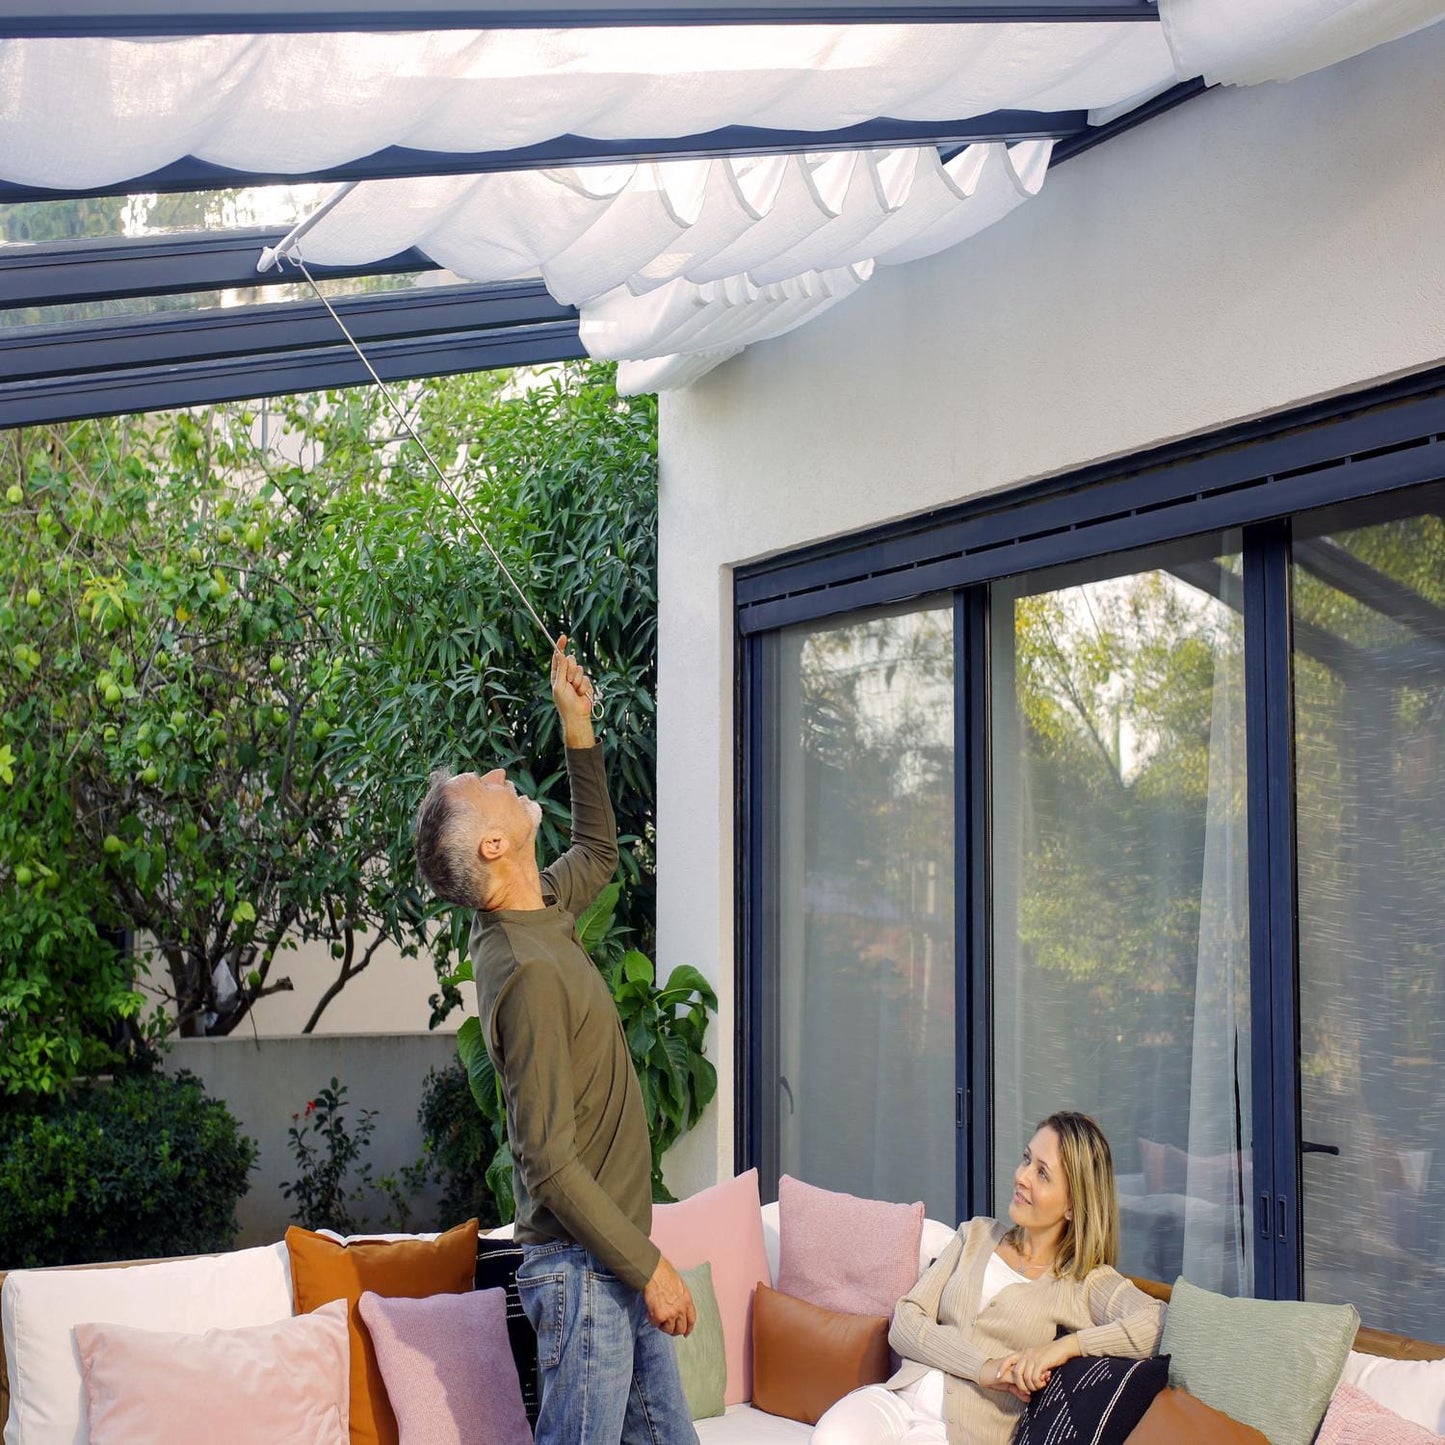 Palram - Canopia Patio Cover Accessories Palram - Canopia | Stockholm Patio Cover Roof Blinds 11x17 ft HG1092